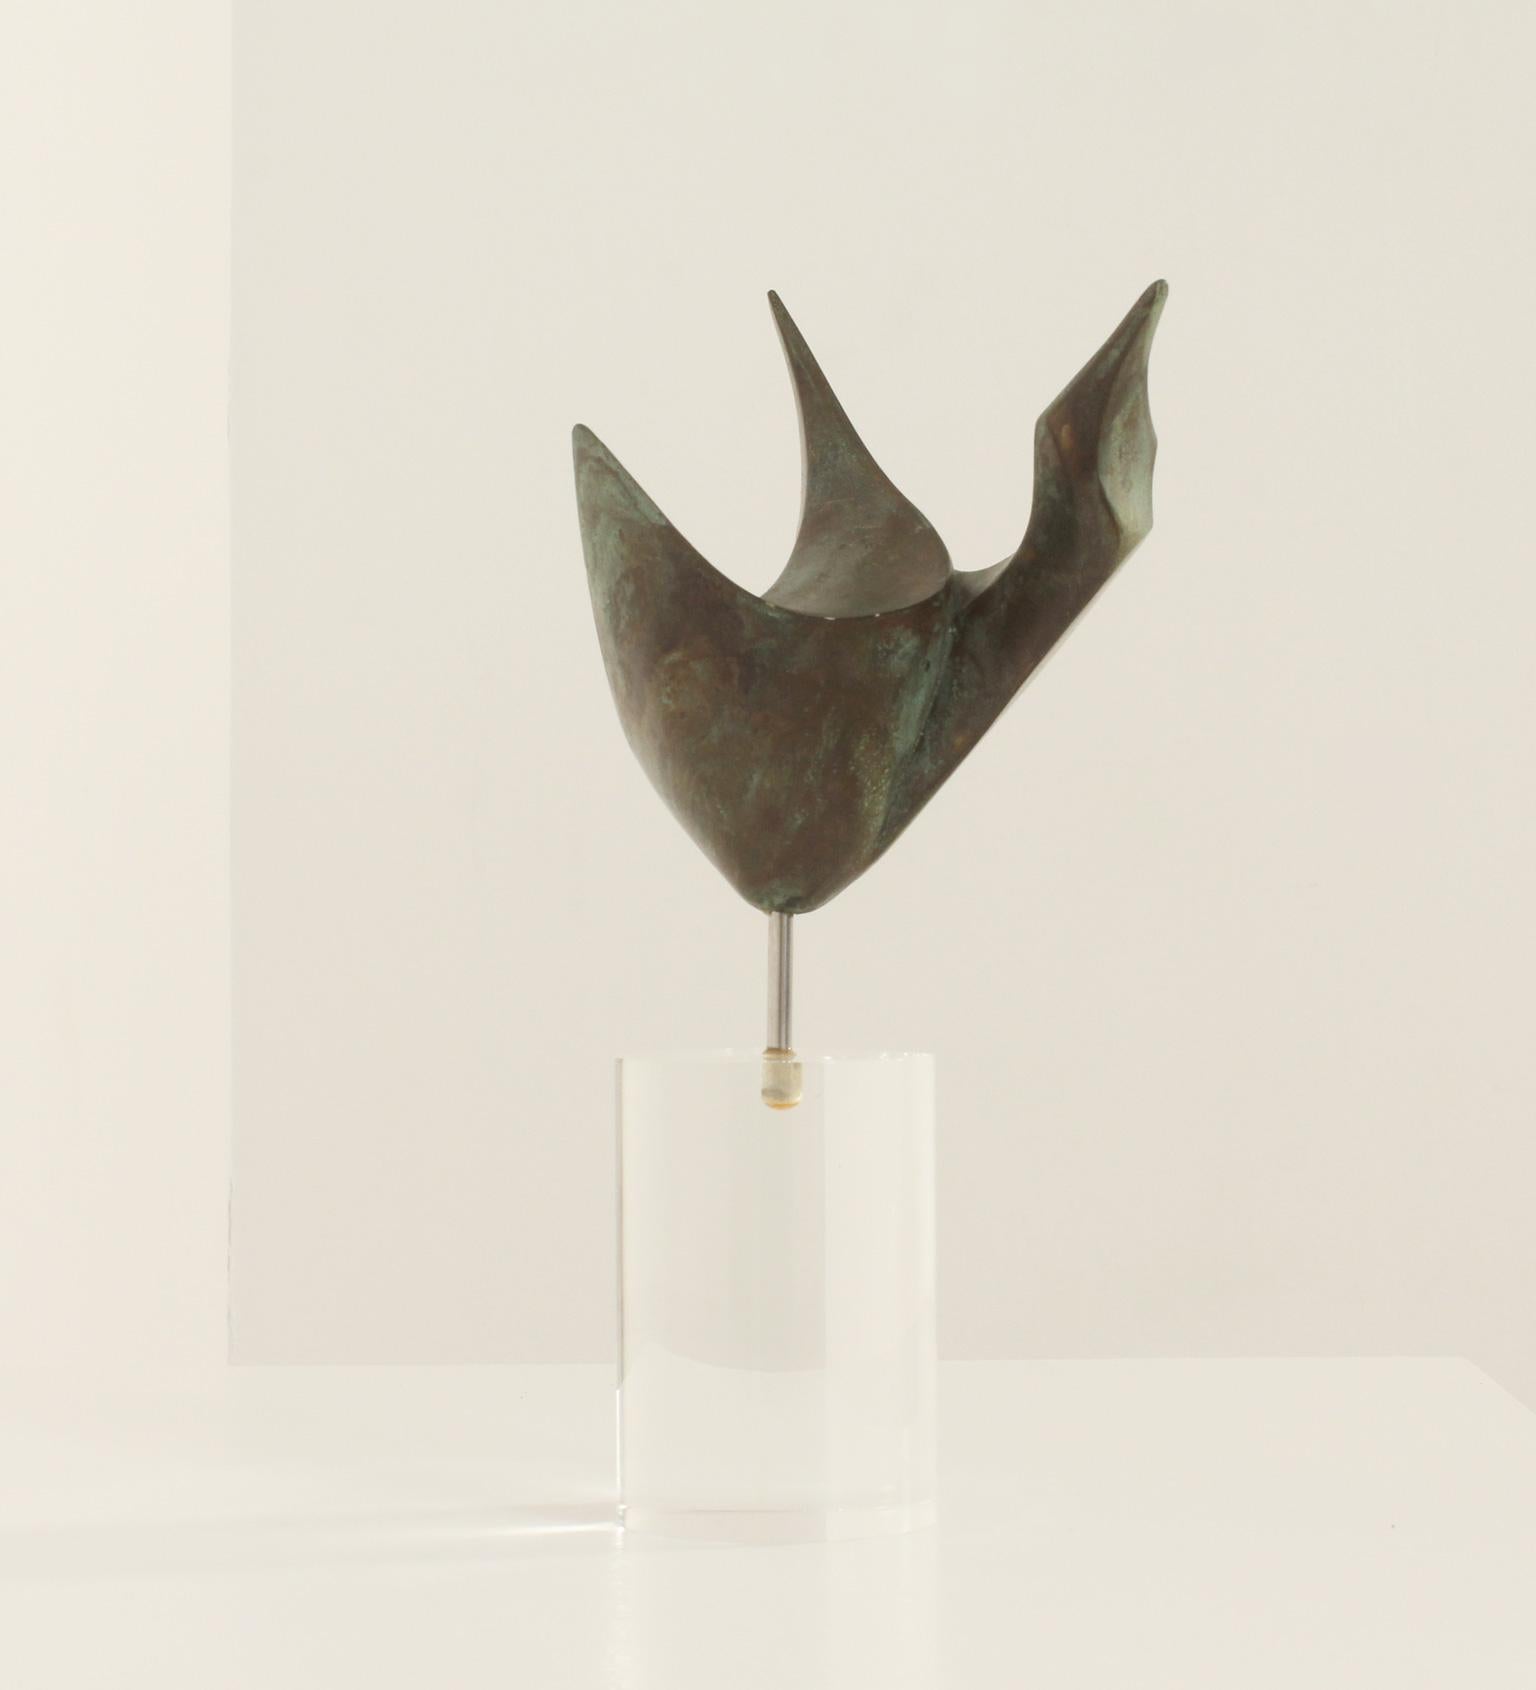 Abstract sculpture by Spanish artist Montserrat Sastre, 1970's. Patinated bronze on methacrylate pedestal. Signed and numbered.